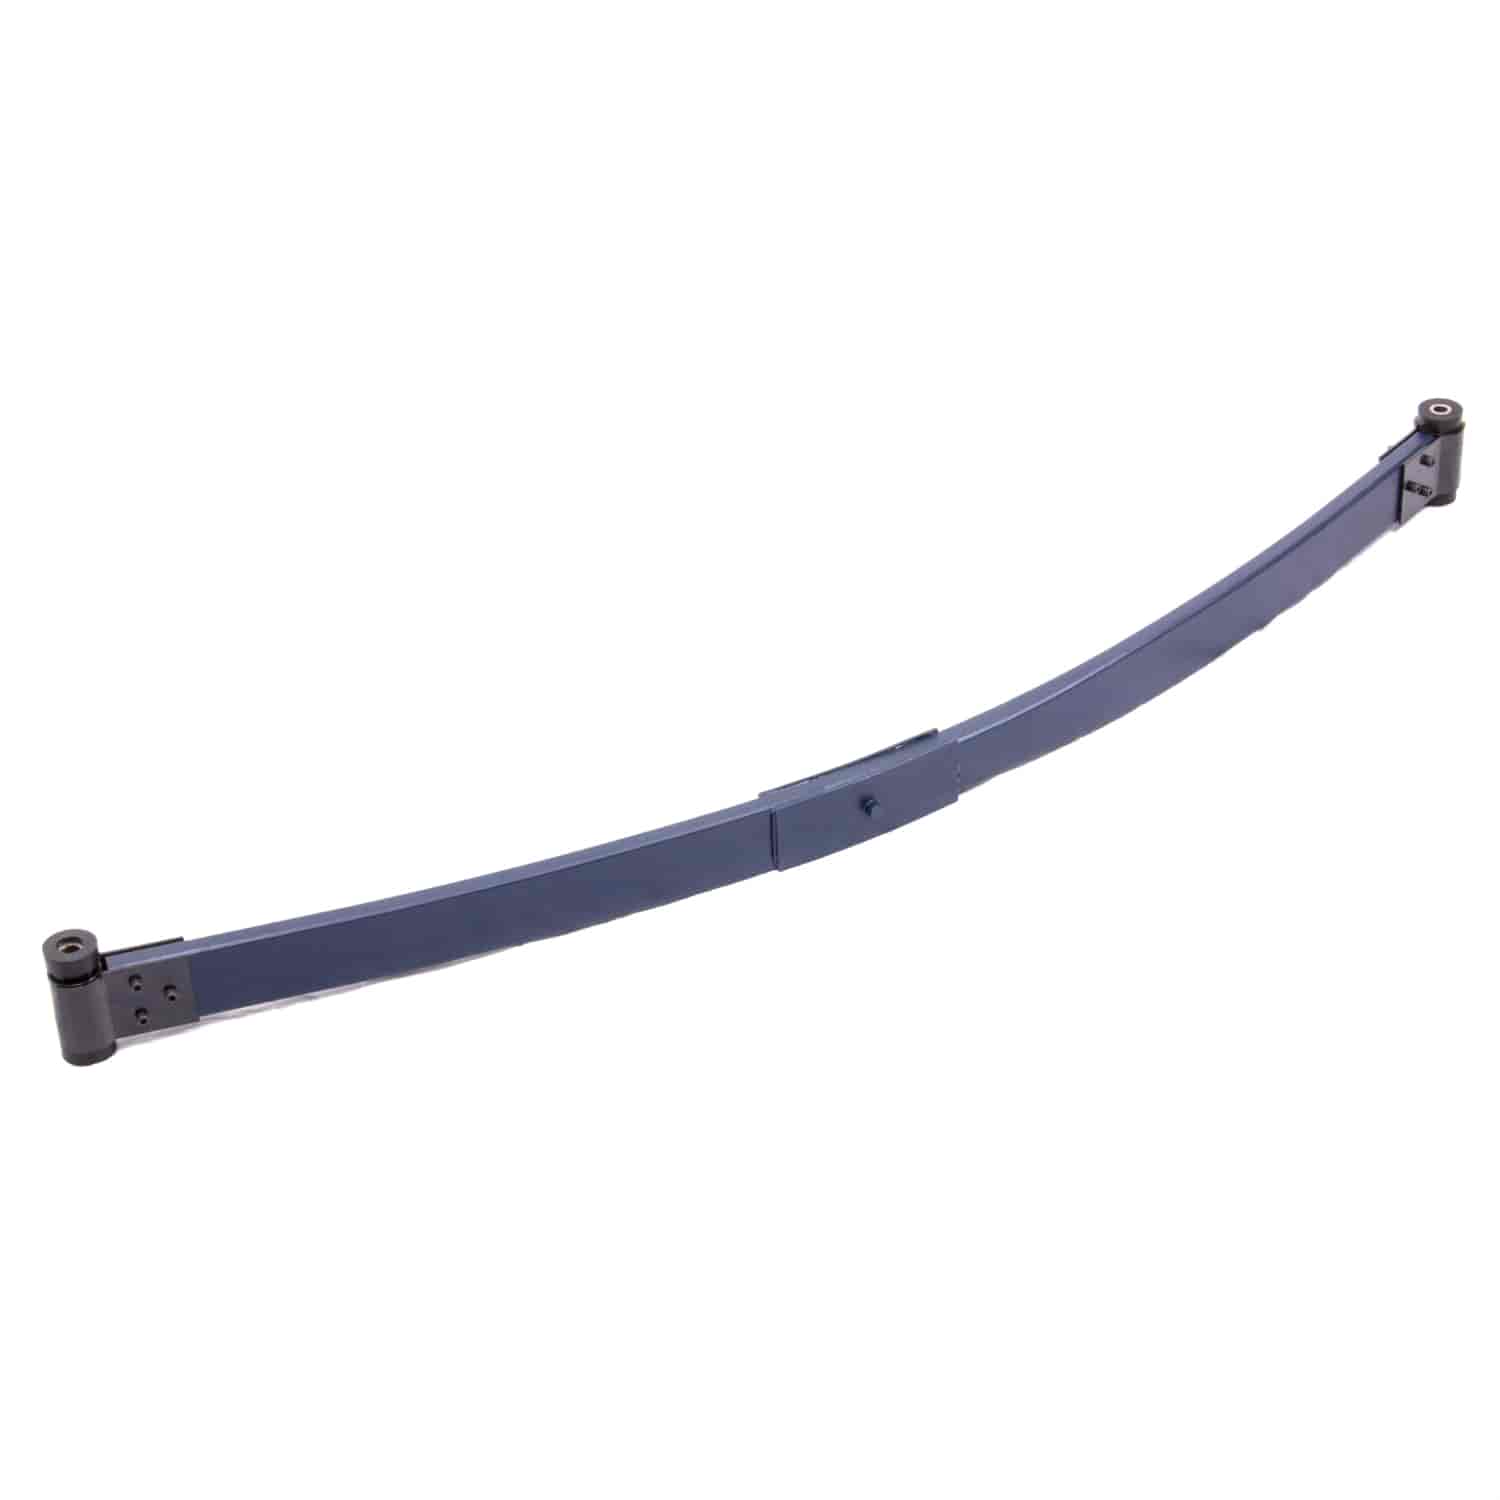 Composite Leaf Spring GM Style - 200 lbs.